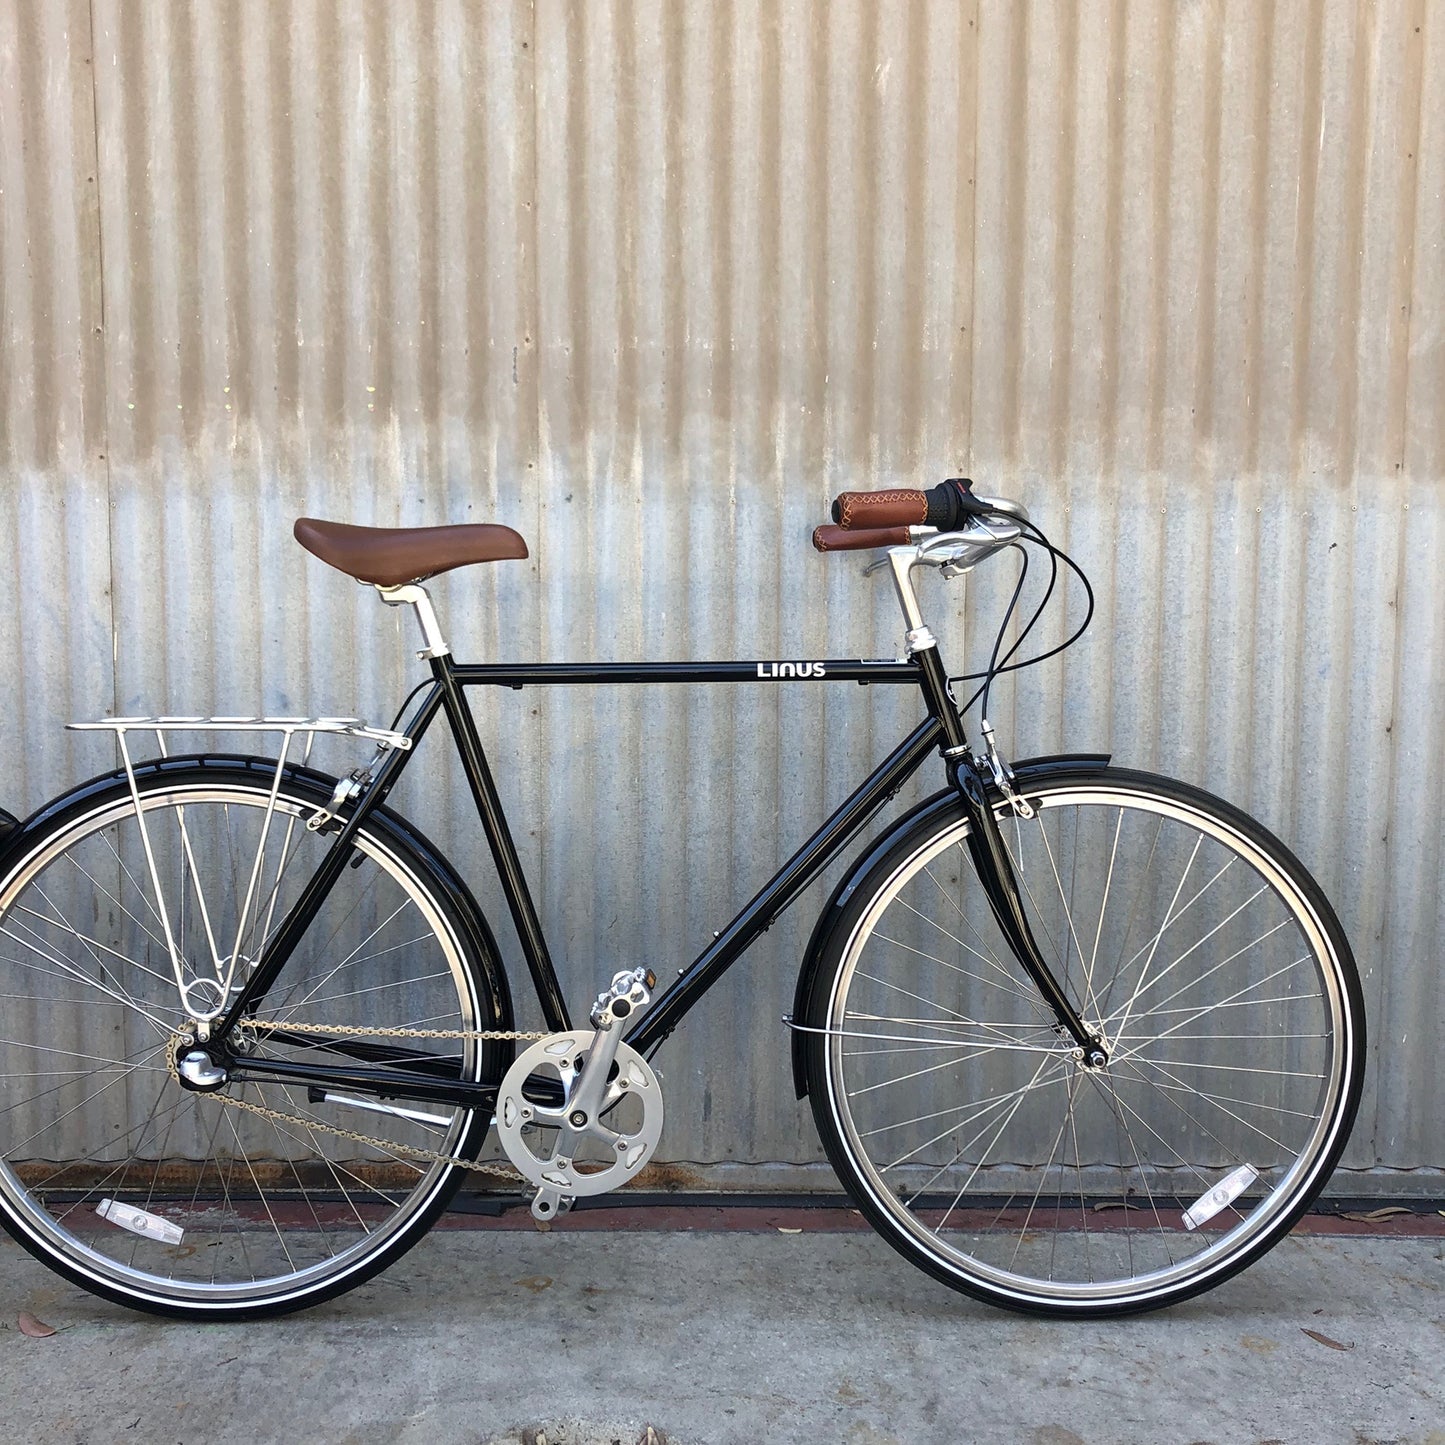 Used Linus Roadster Sport 3-Speed in Exceptional Condition